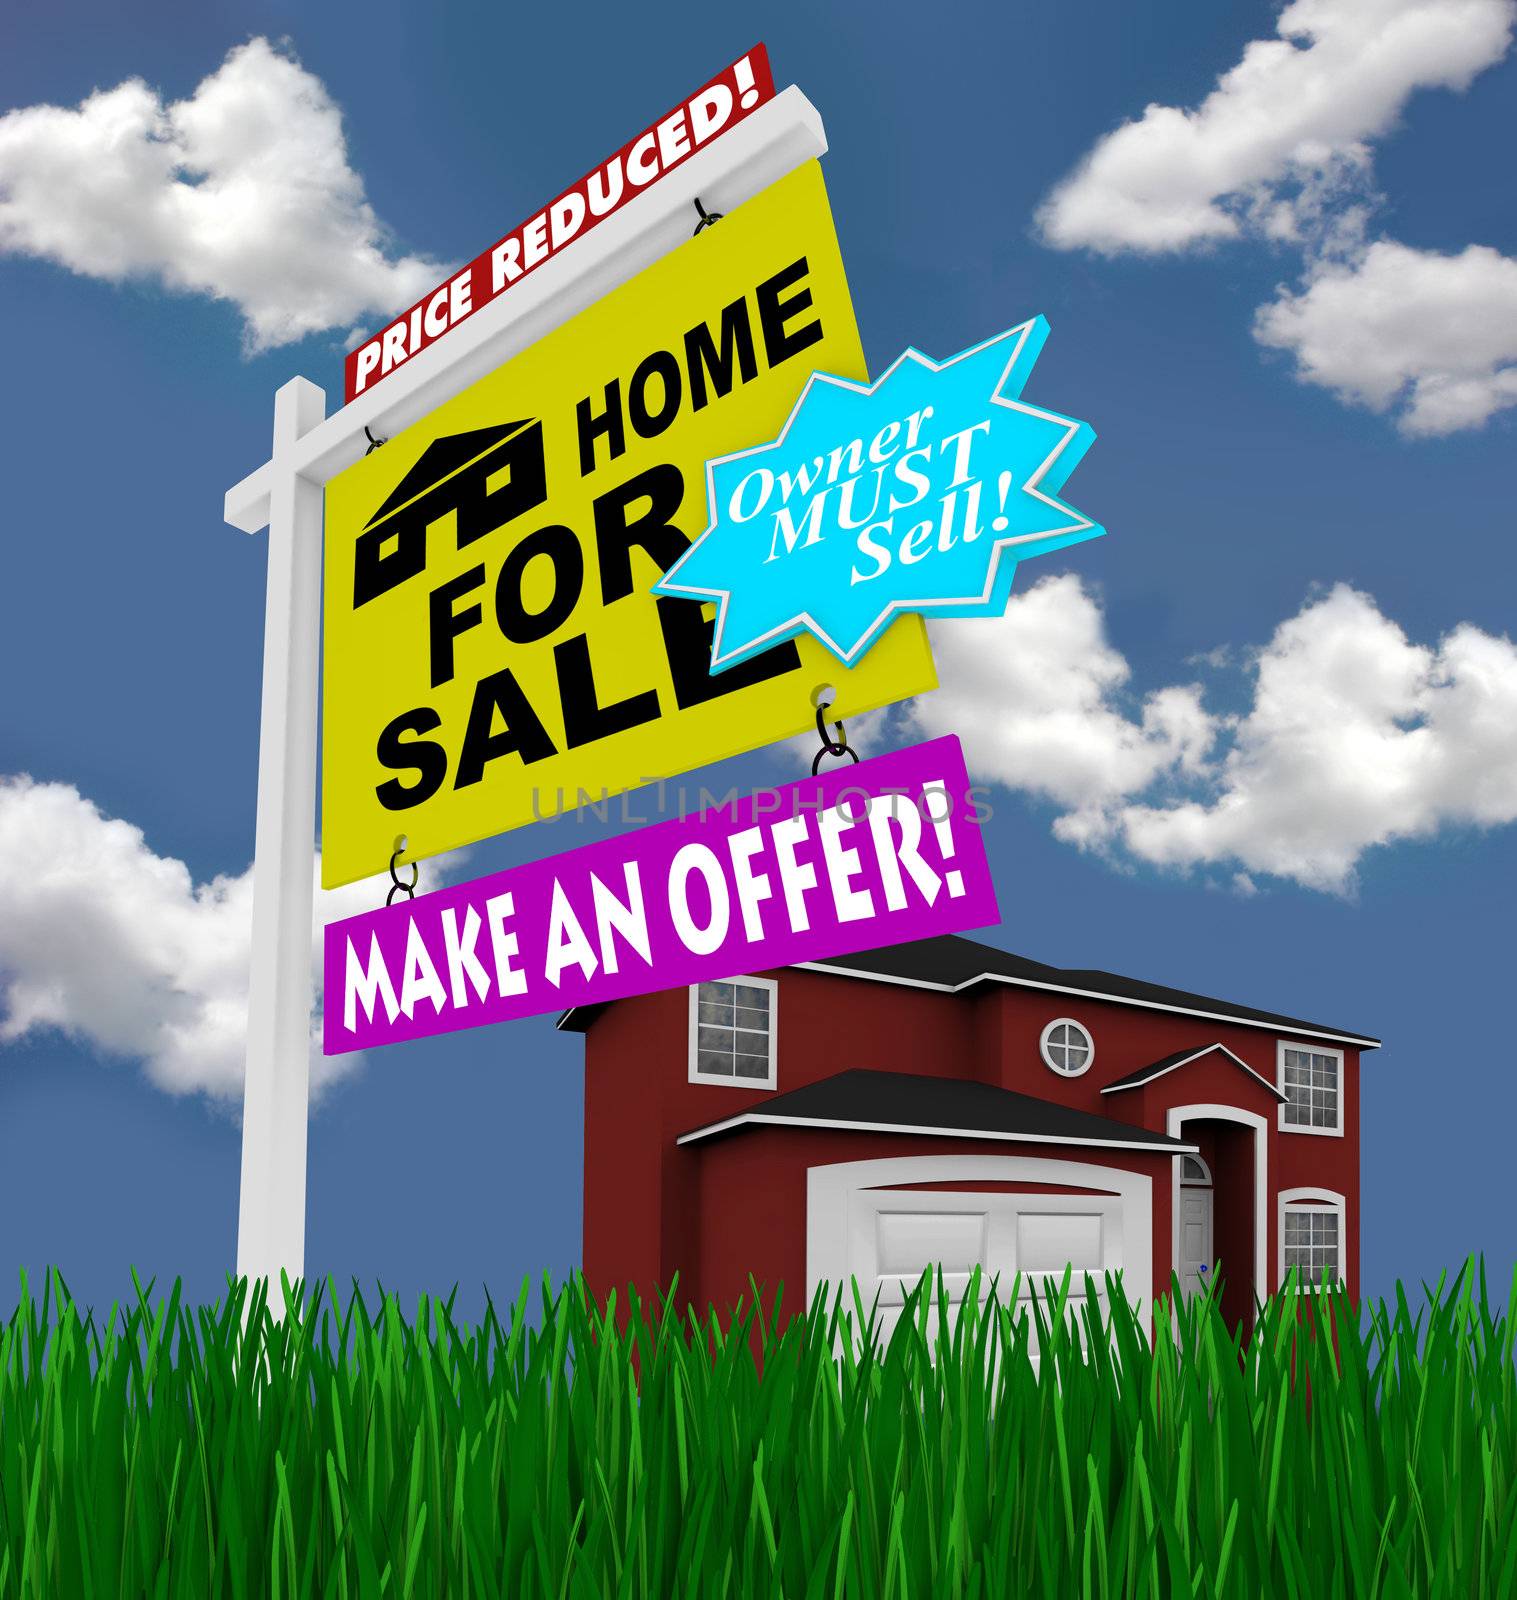 A home for sale sign stands in front of a red house, with green grass and blue skies